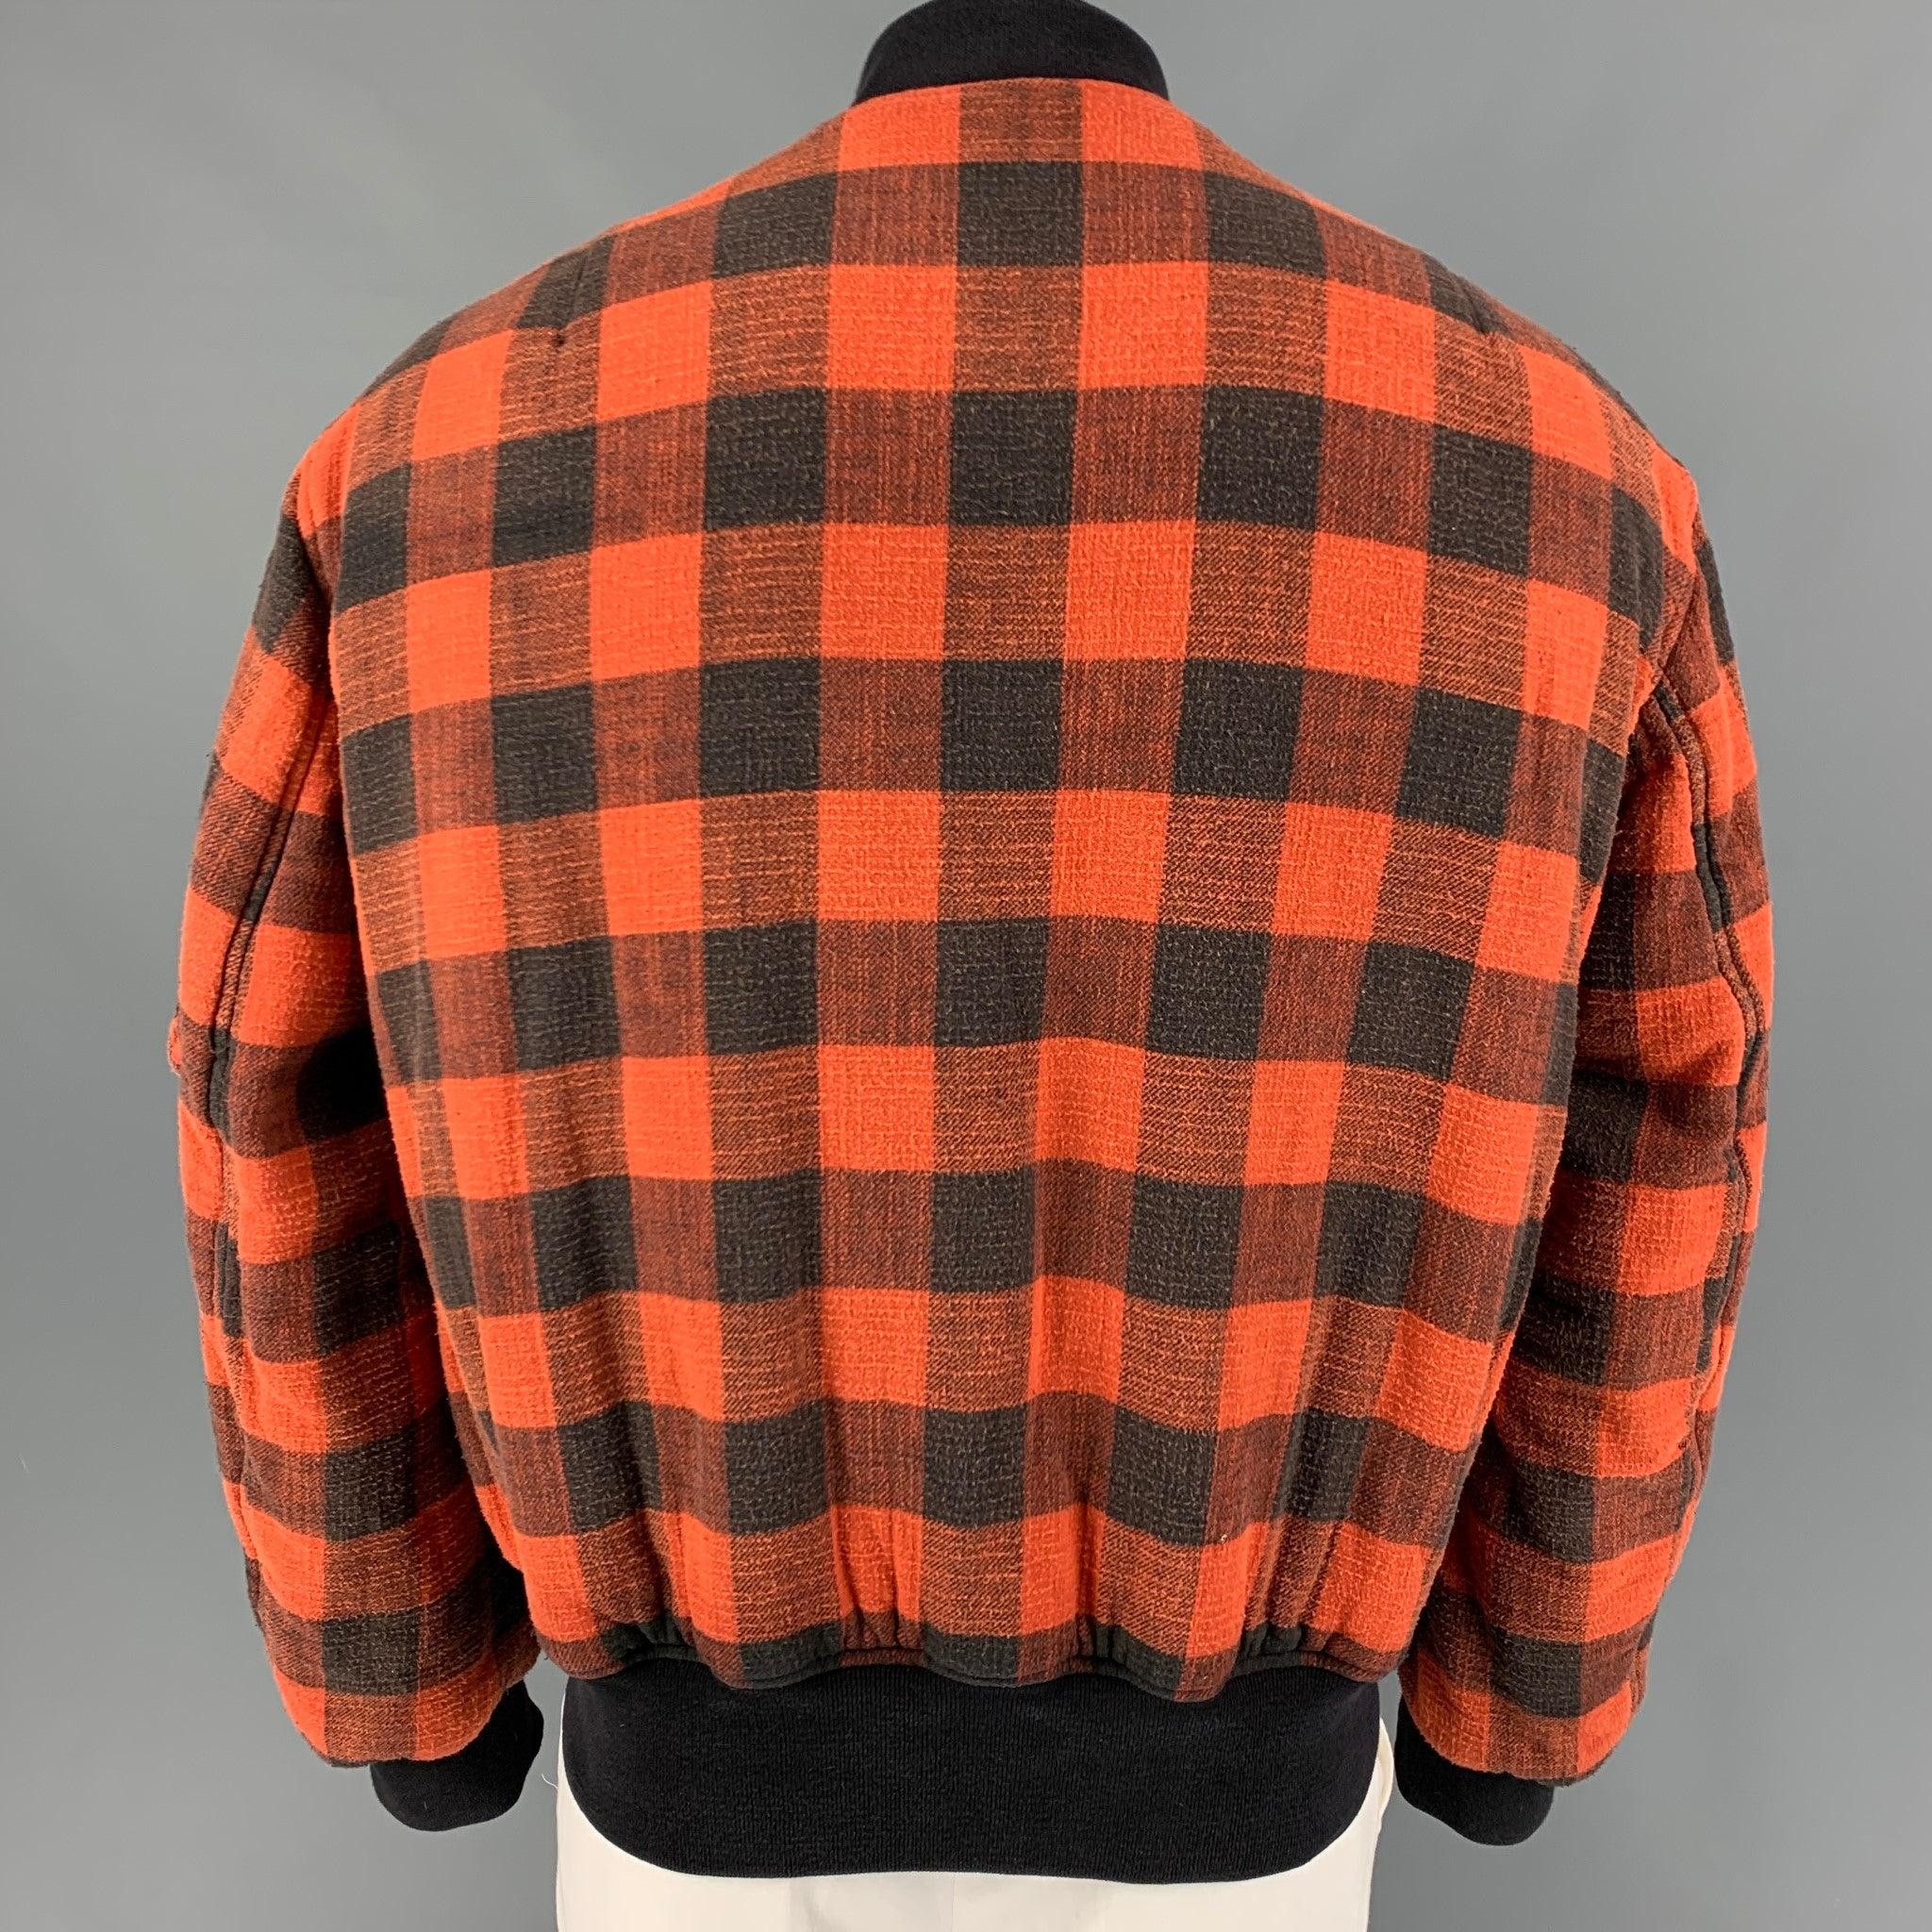 R13 Size M Orange Black Plaid Cotton Reversible Jacket In Good Condition For Sale In San Francisco, CA